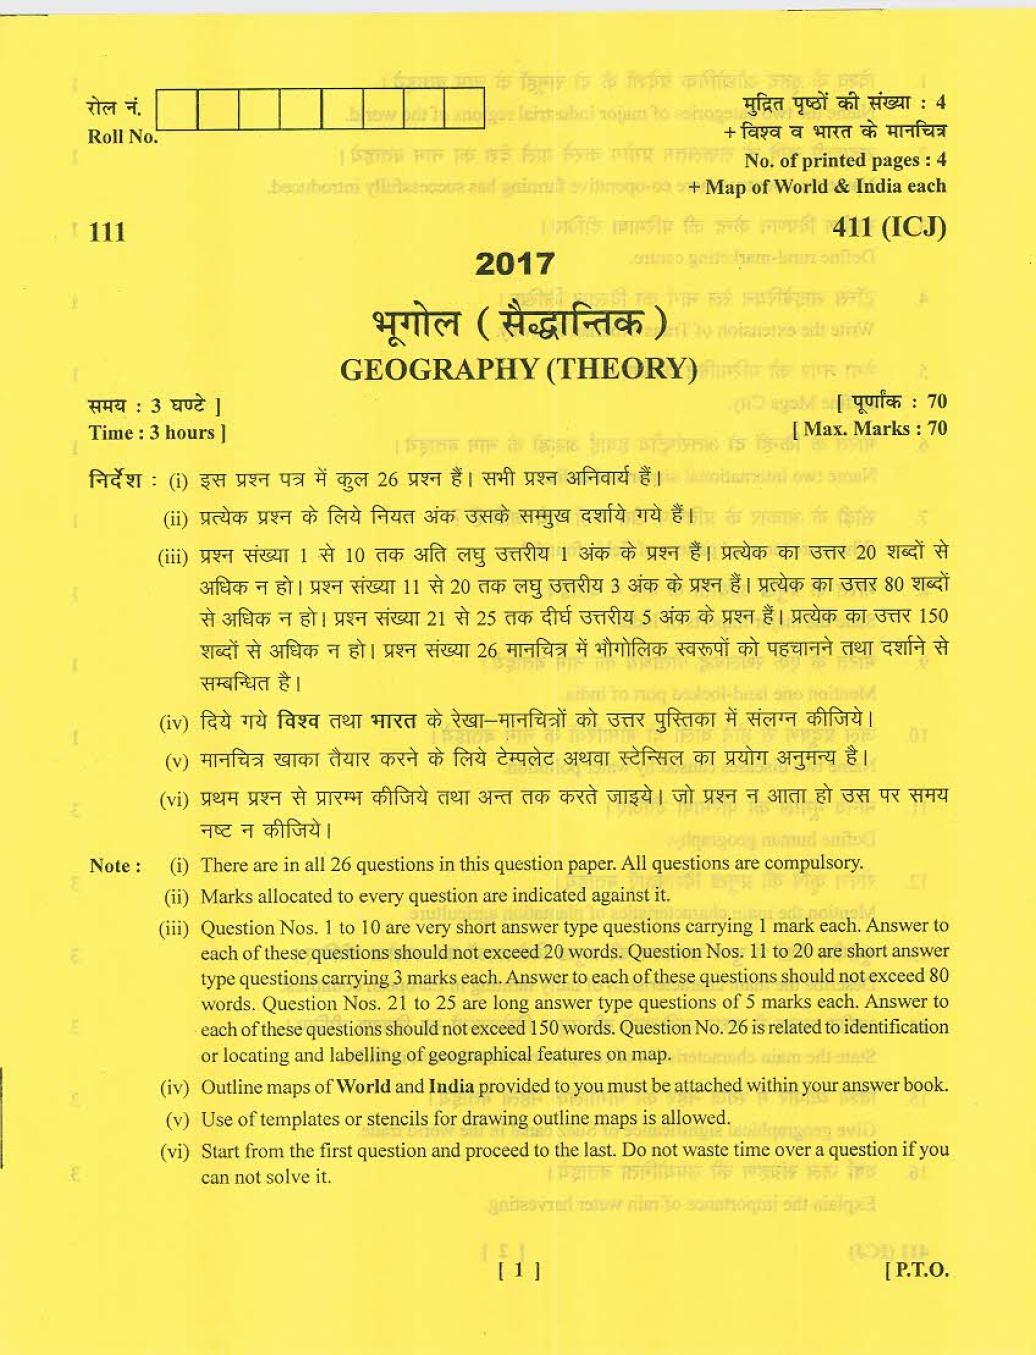 Uttarakhand Board Class 12 Question Paper 2017 for Geography - Page 1